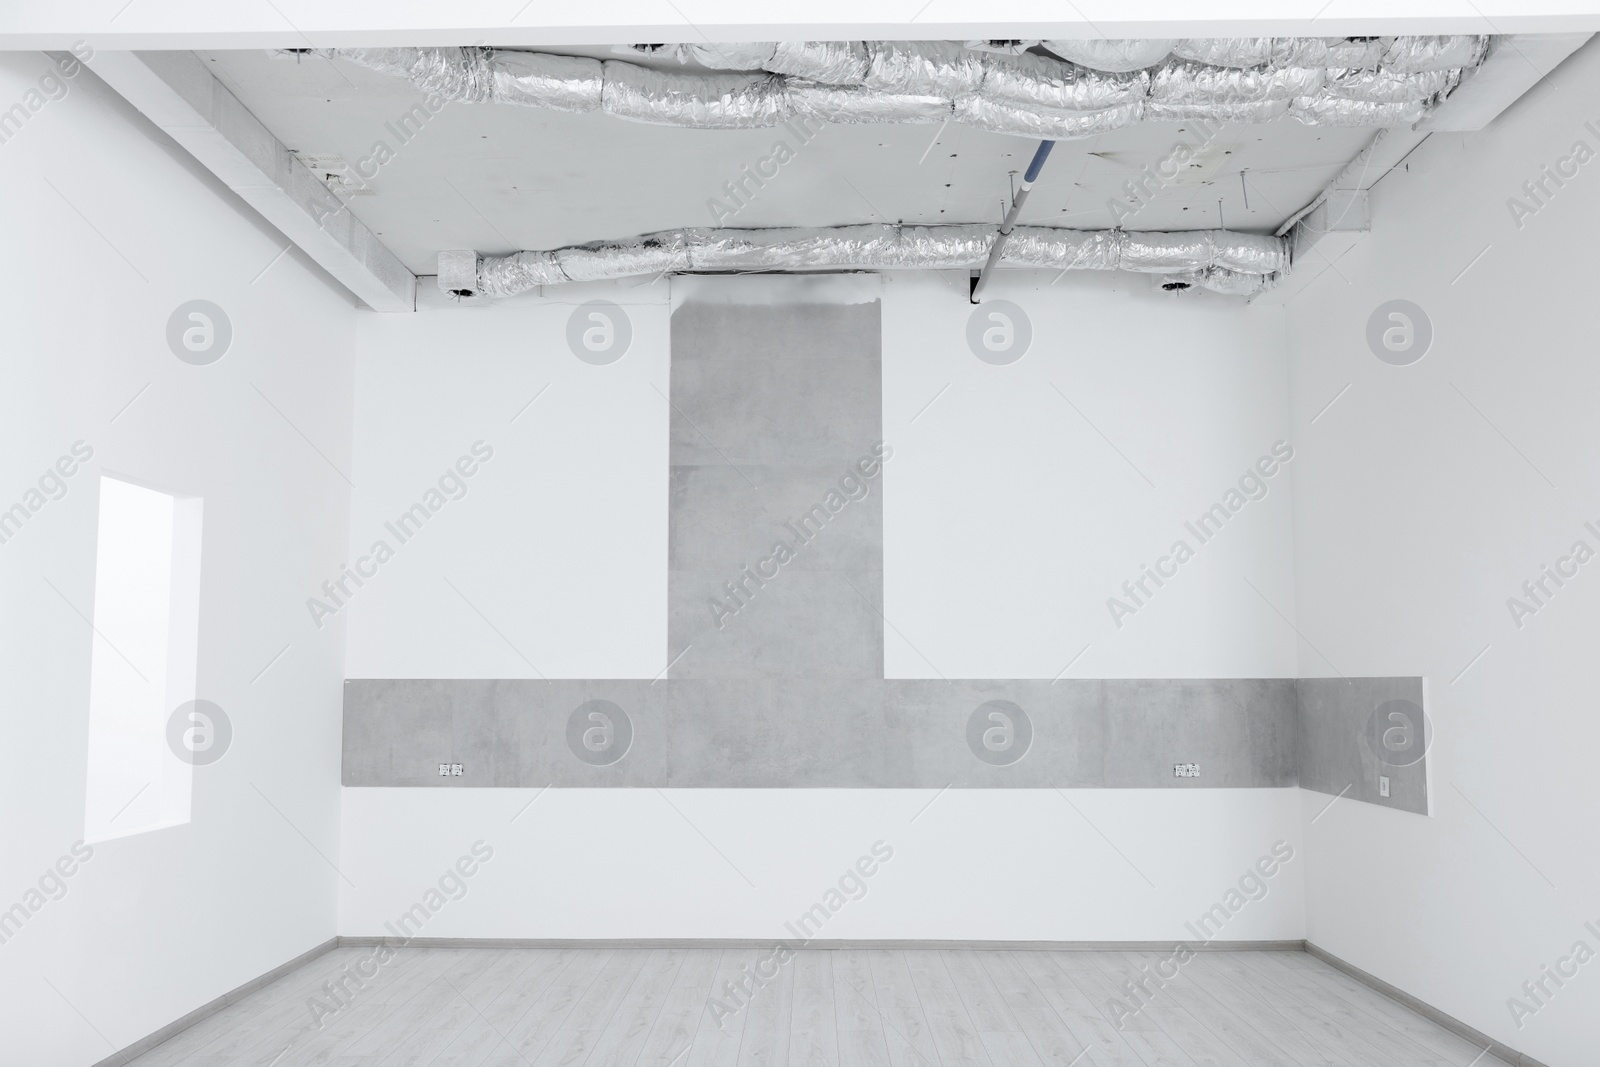 Photo of Empty room with white walls, sockets and ventilation system during repair